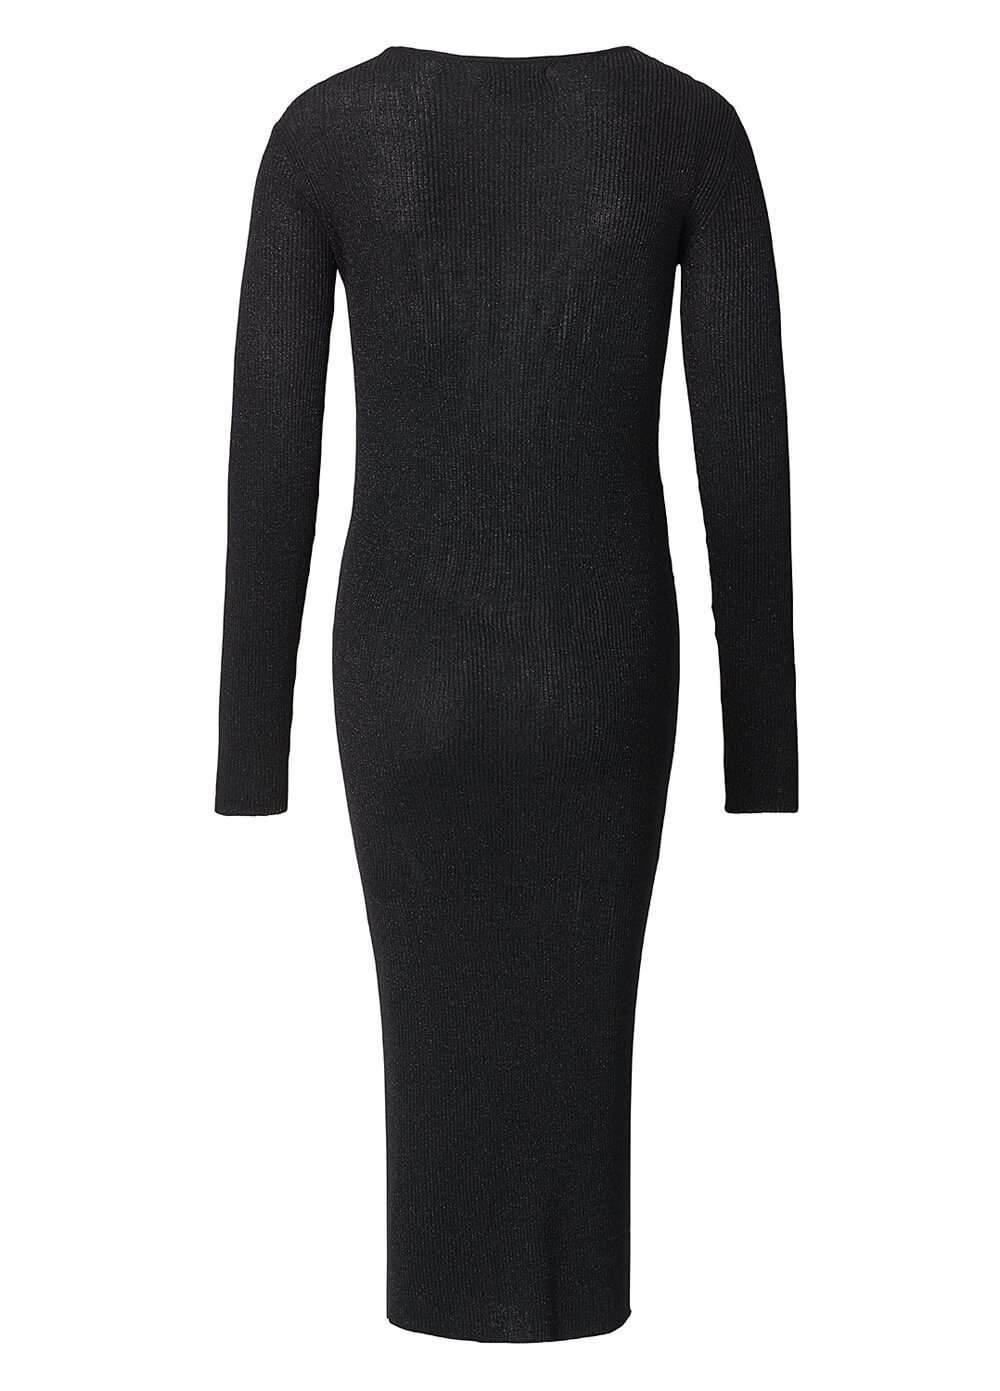 Jasmijn Ribbed Knit Maternity Dress in Black by Noppies